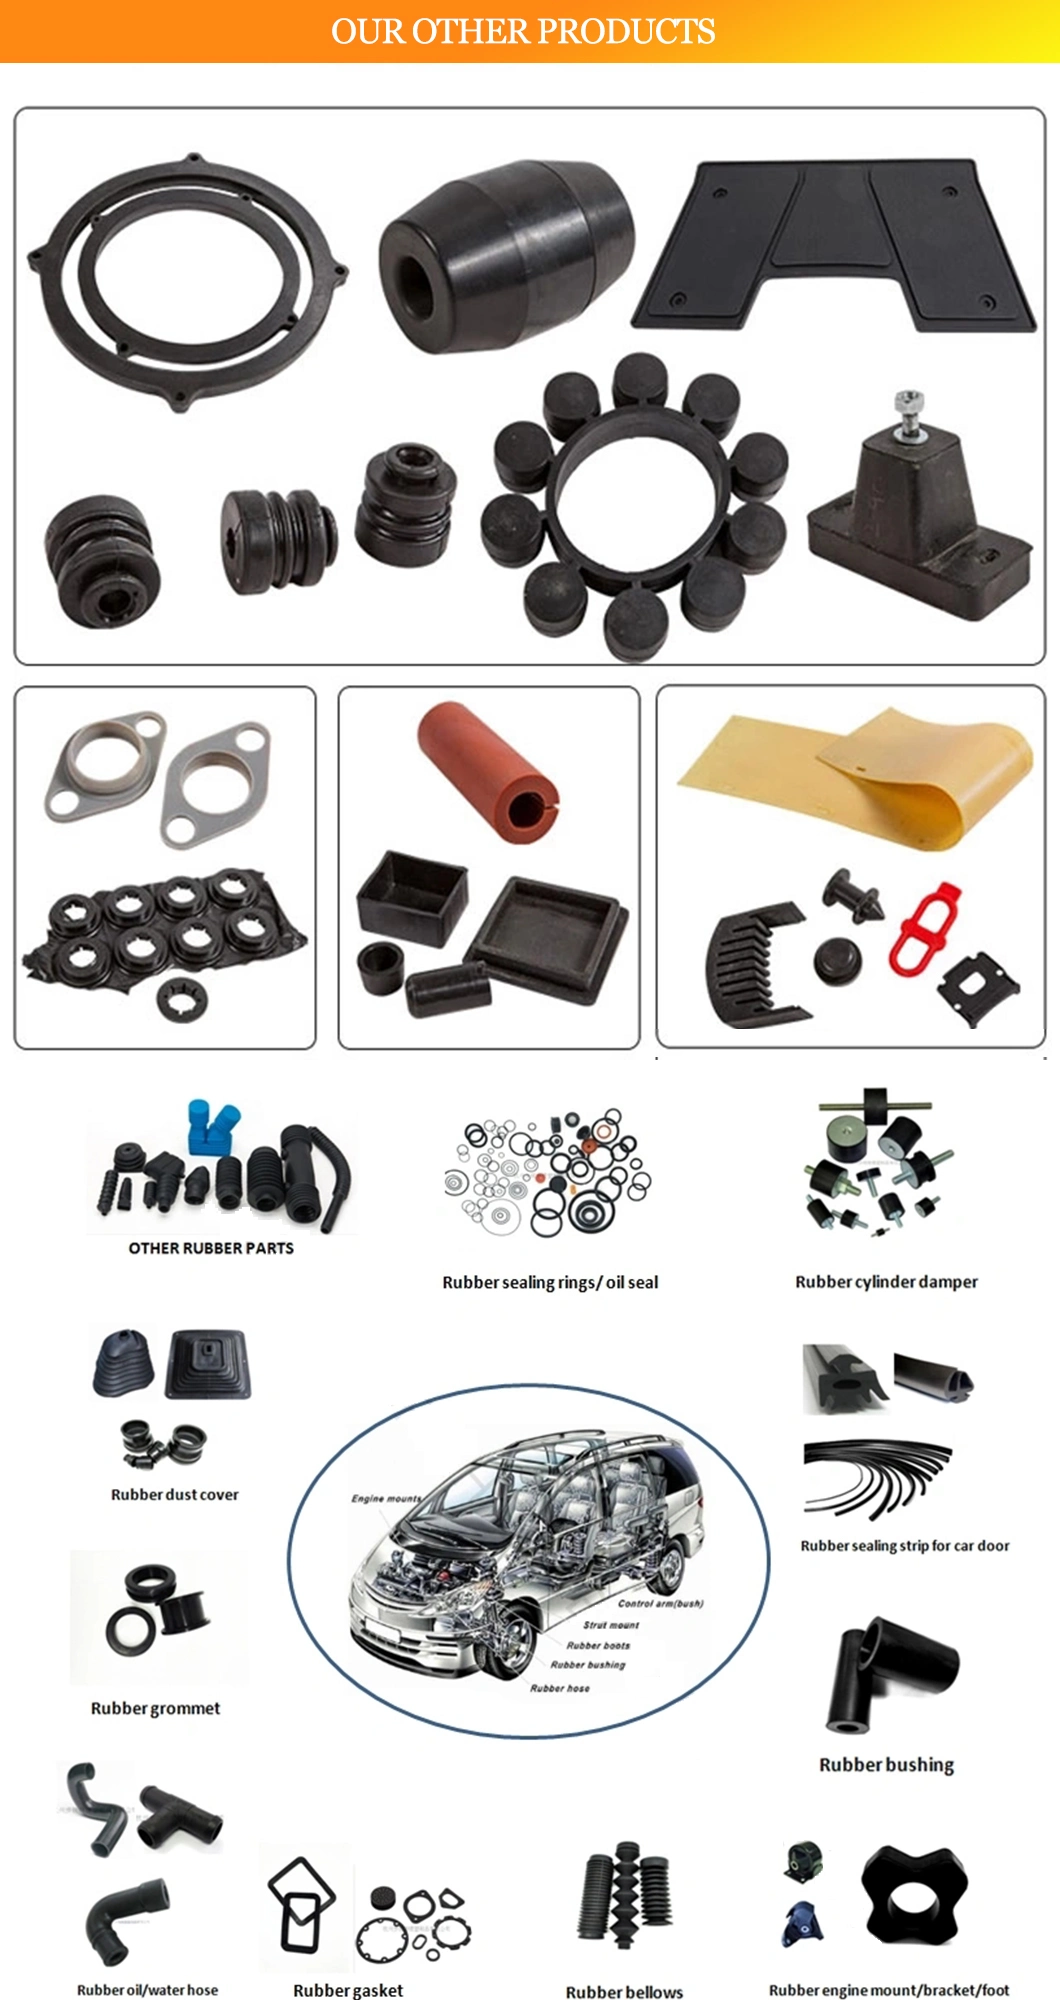 All Types of Rubber Grommet for Cable System Customized NBR Cr Nr EPDM Silicone Rubber